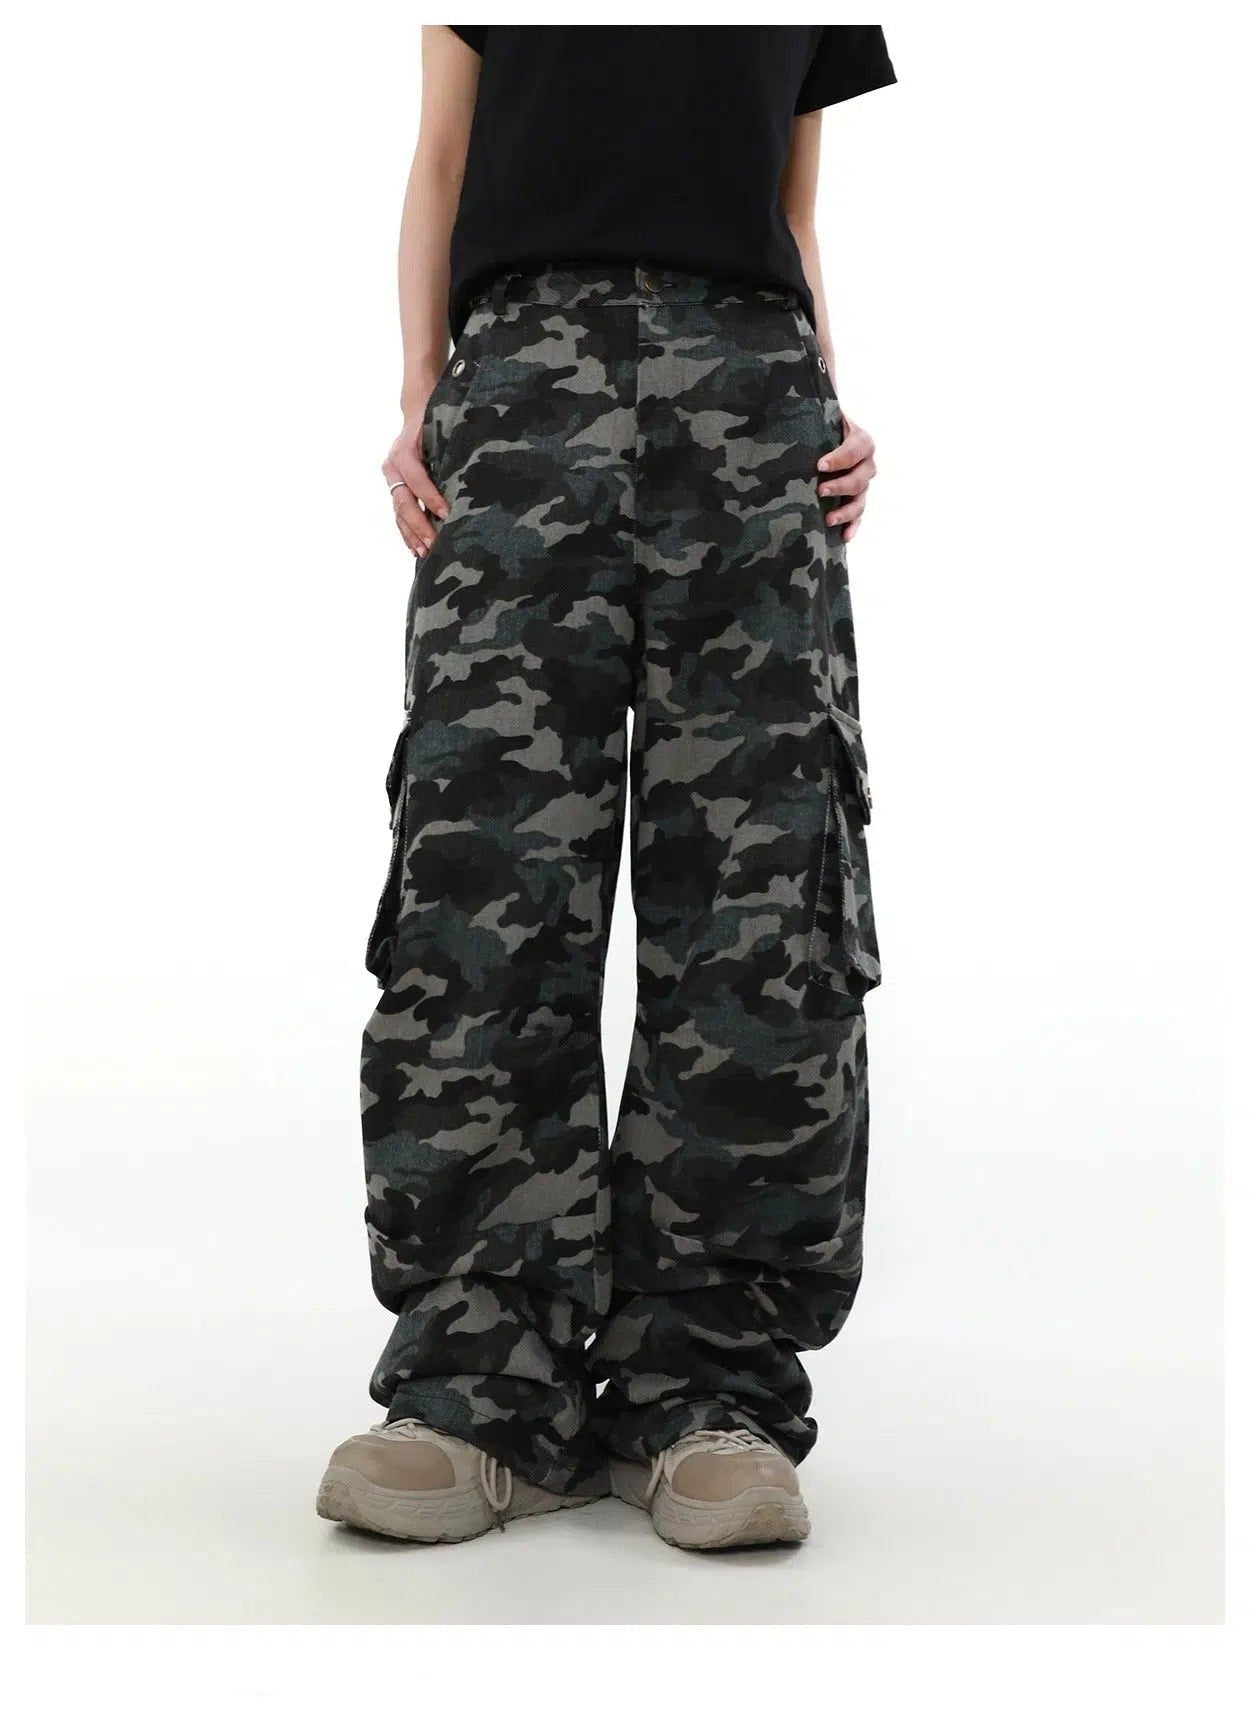 Camo Print Pocket Detail Cargo Pants Korean Street Fashion Pants By Mr Nearly Shop Online at OH Vault